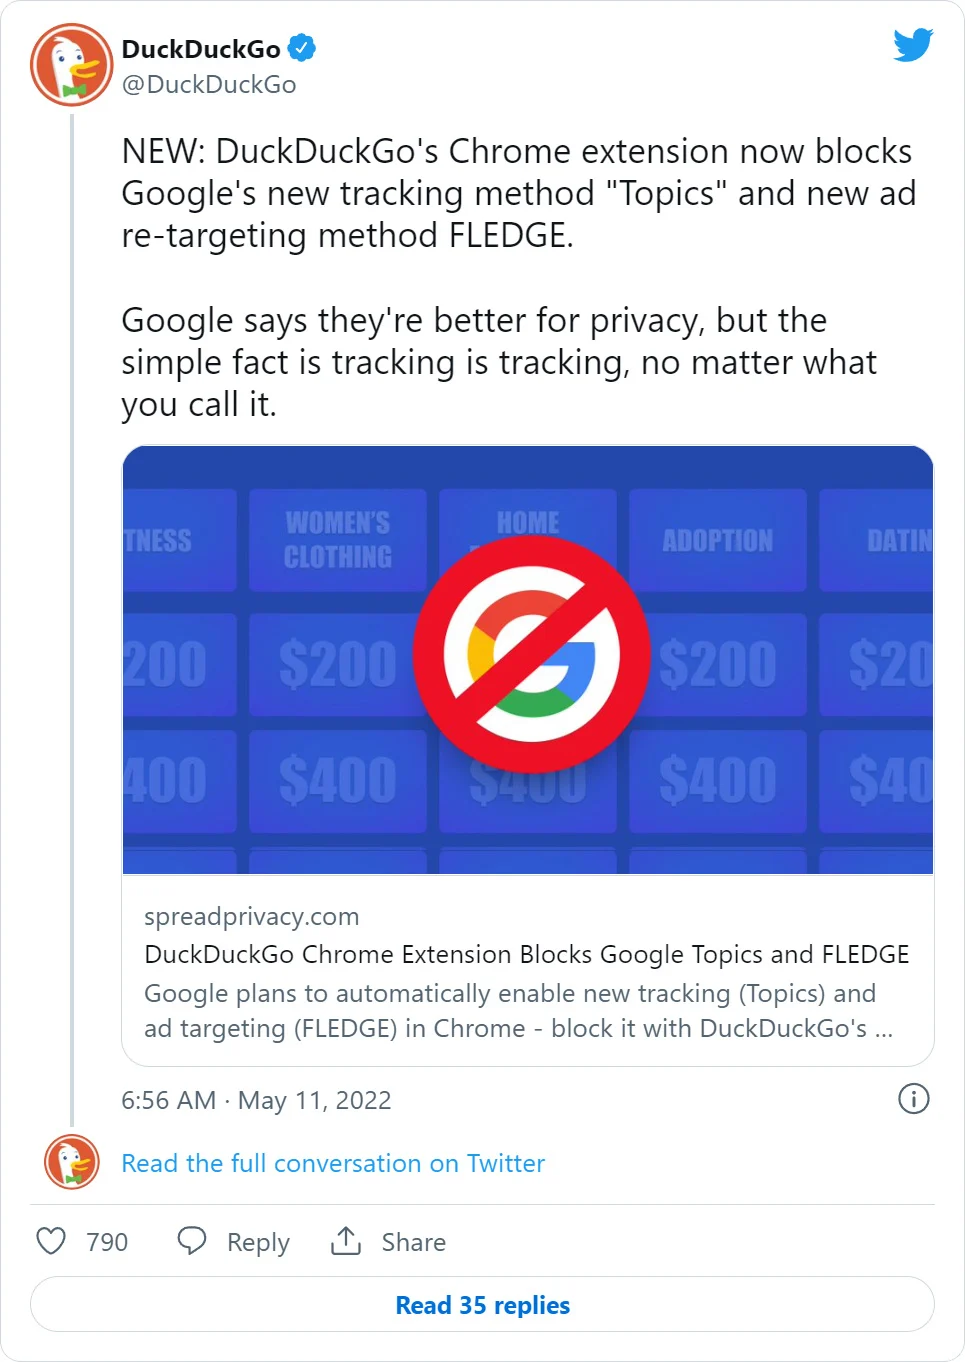 DuckDuckGo tweet about tracking and Google